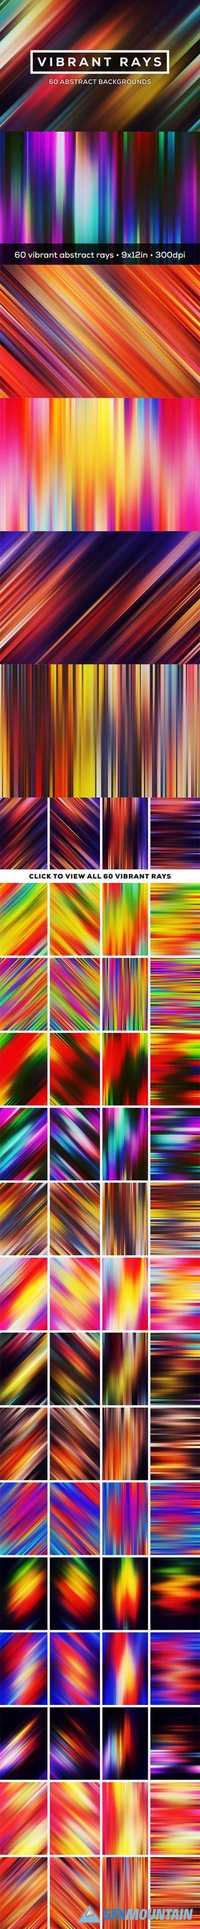 Vibrant Rays: 60 Ray Backgrounds 772984